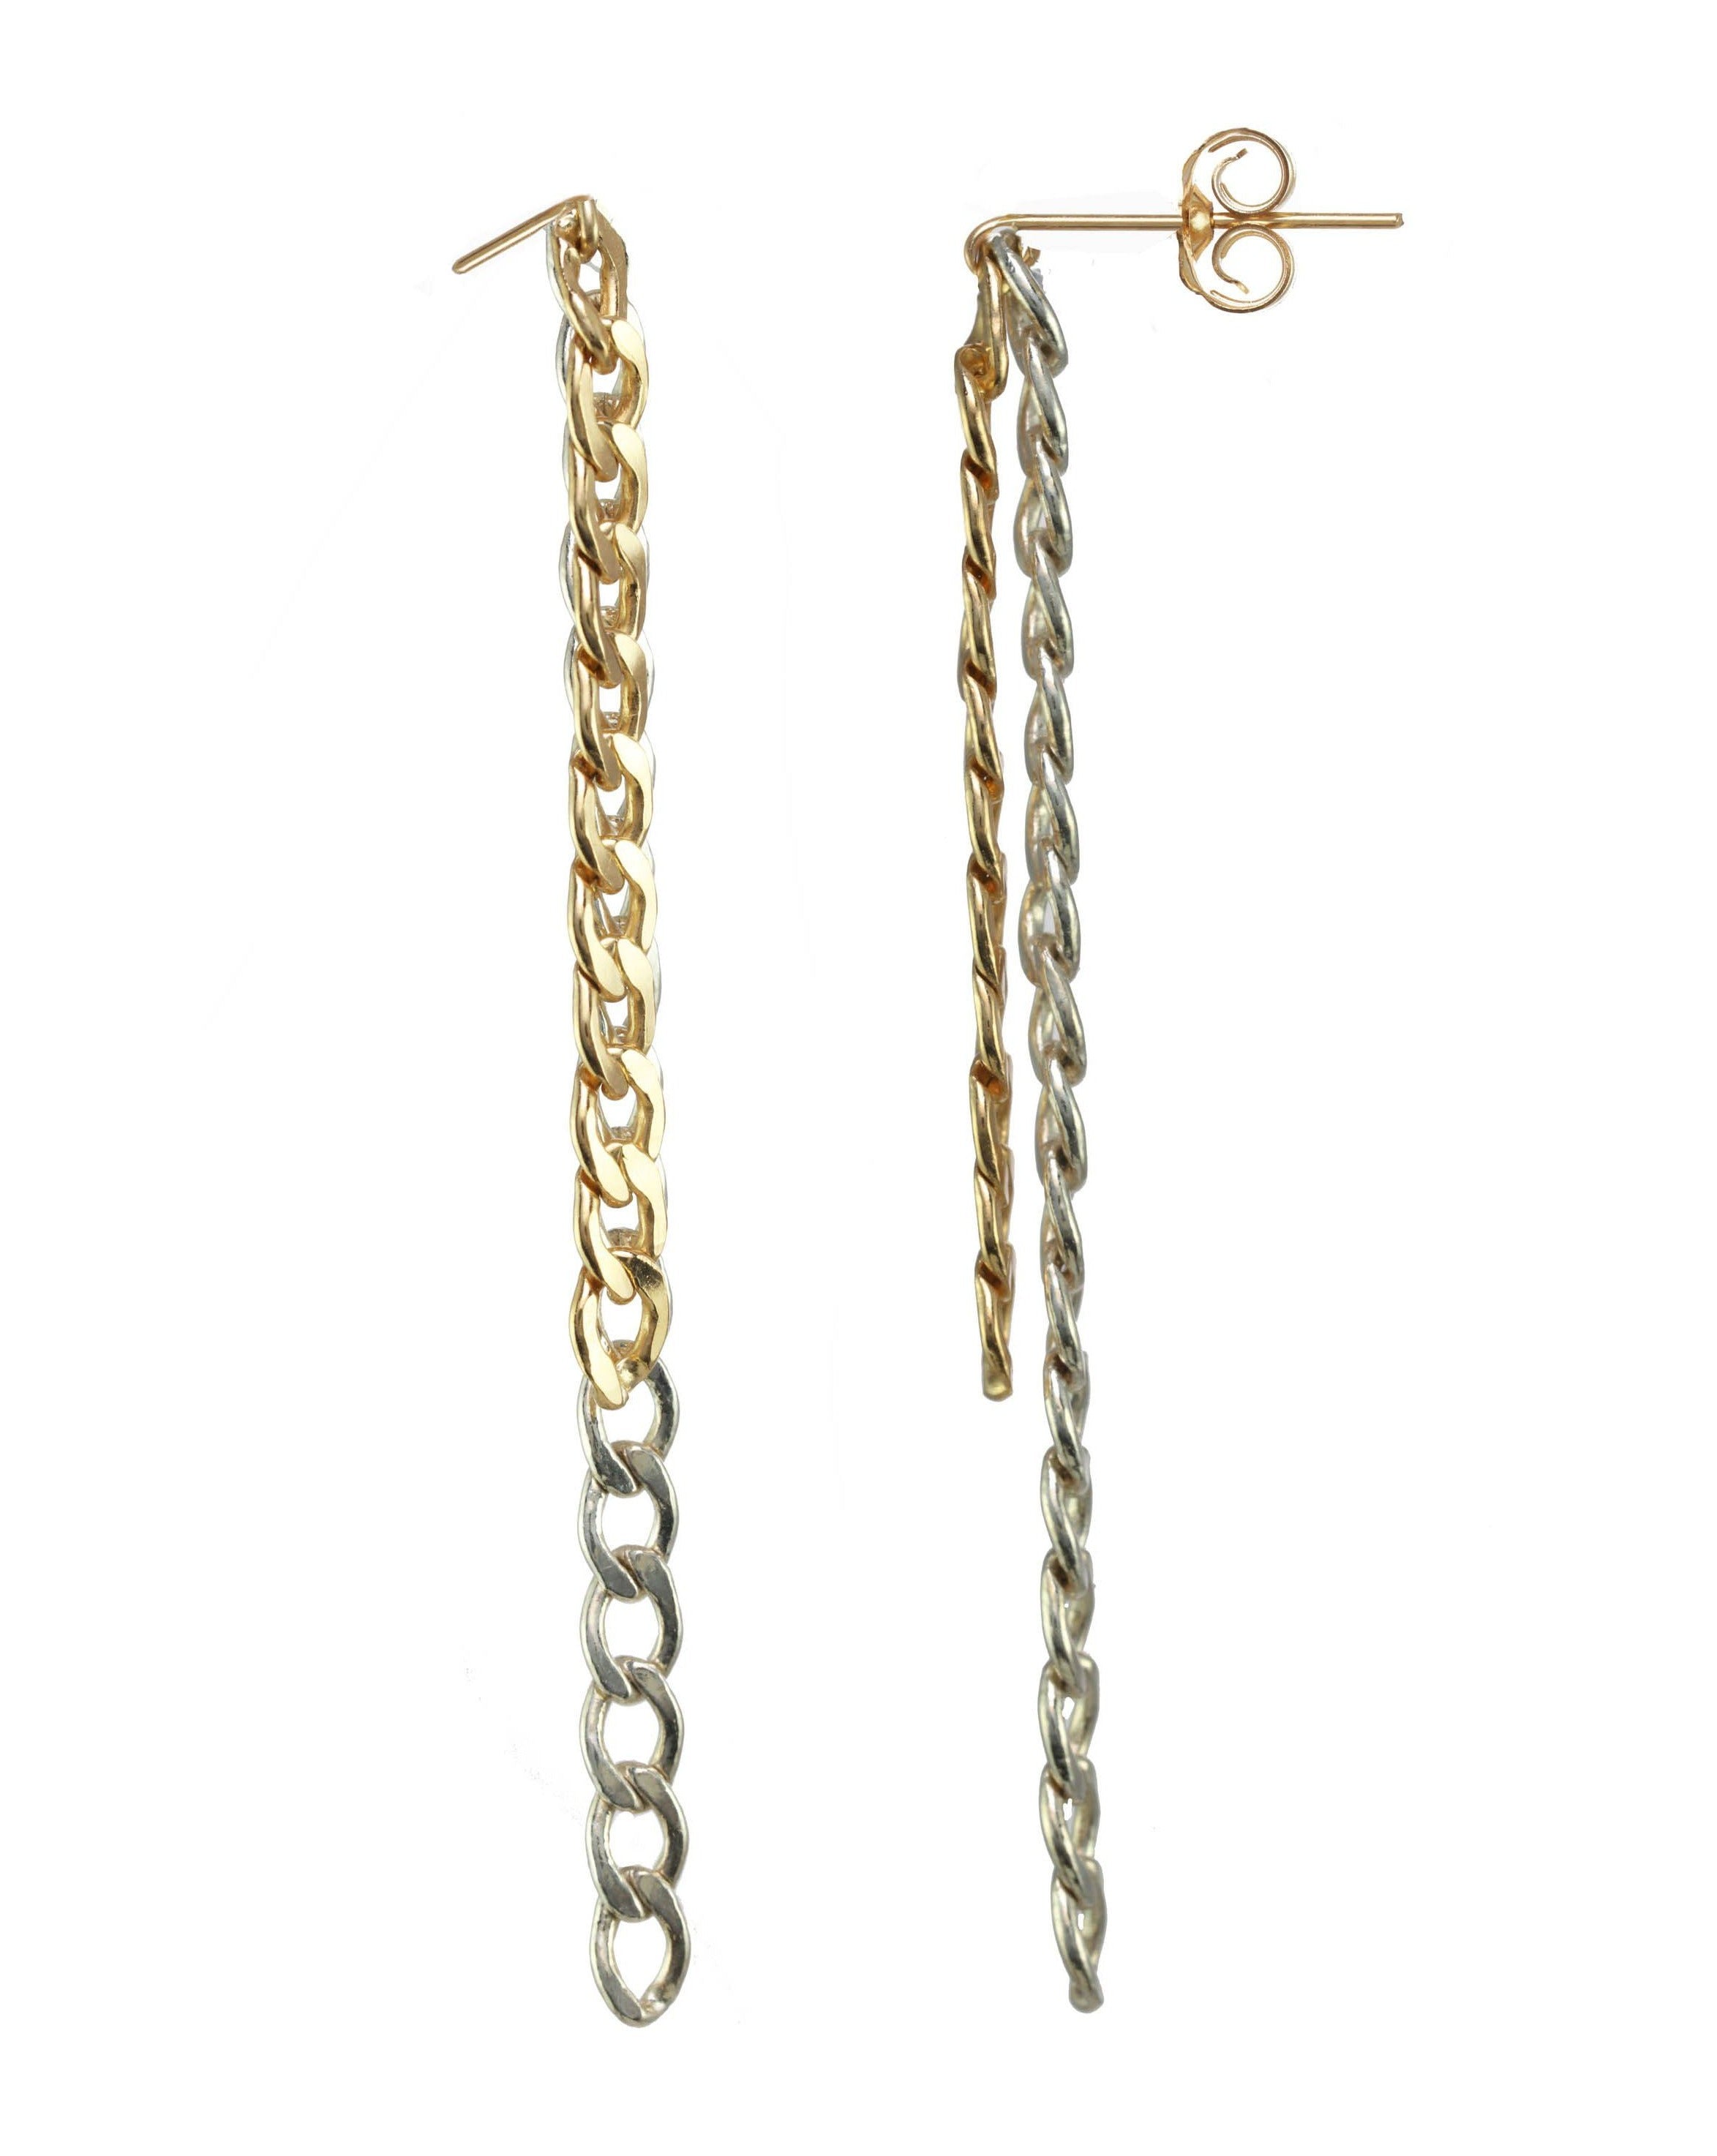 Cadenetta Earrings by KOZAKH. 3 inch drop double strand Flat Curb chain earrings in 14K Gold Filled and Sterling Silver. One strand is gold and one is silver.